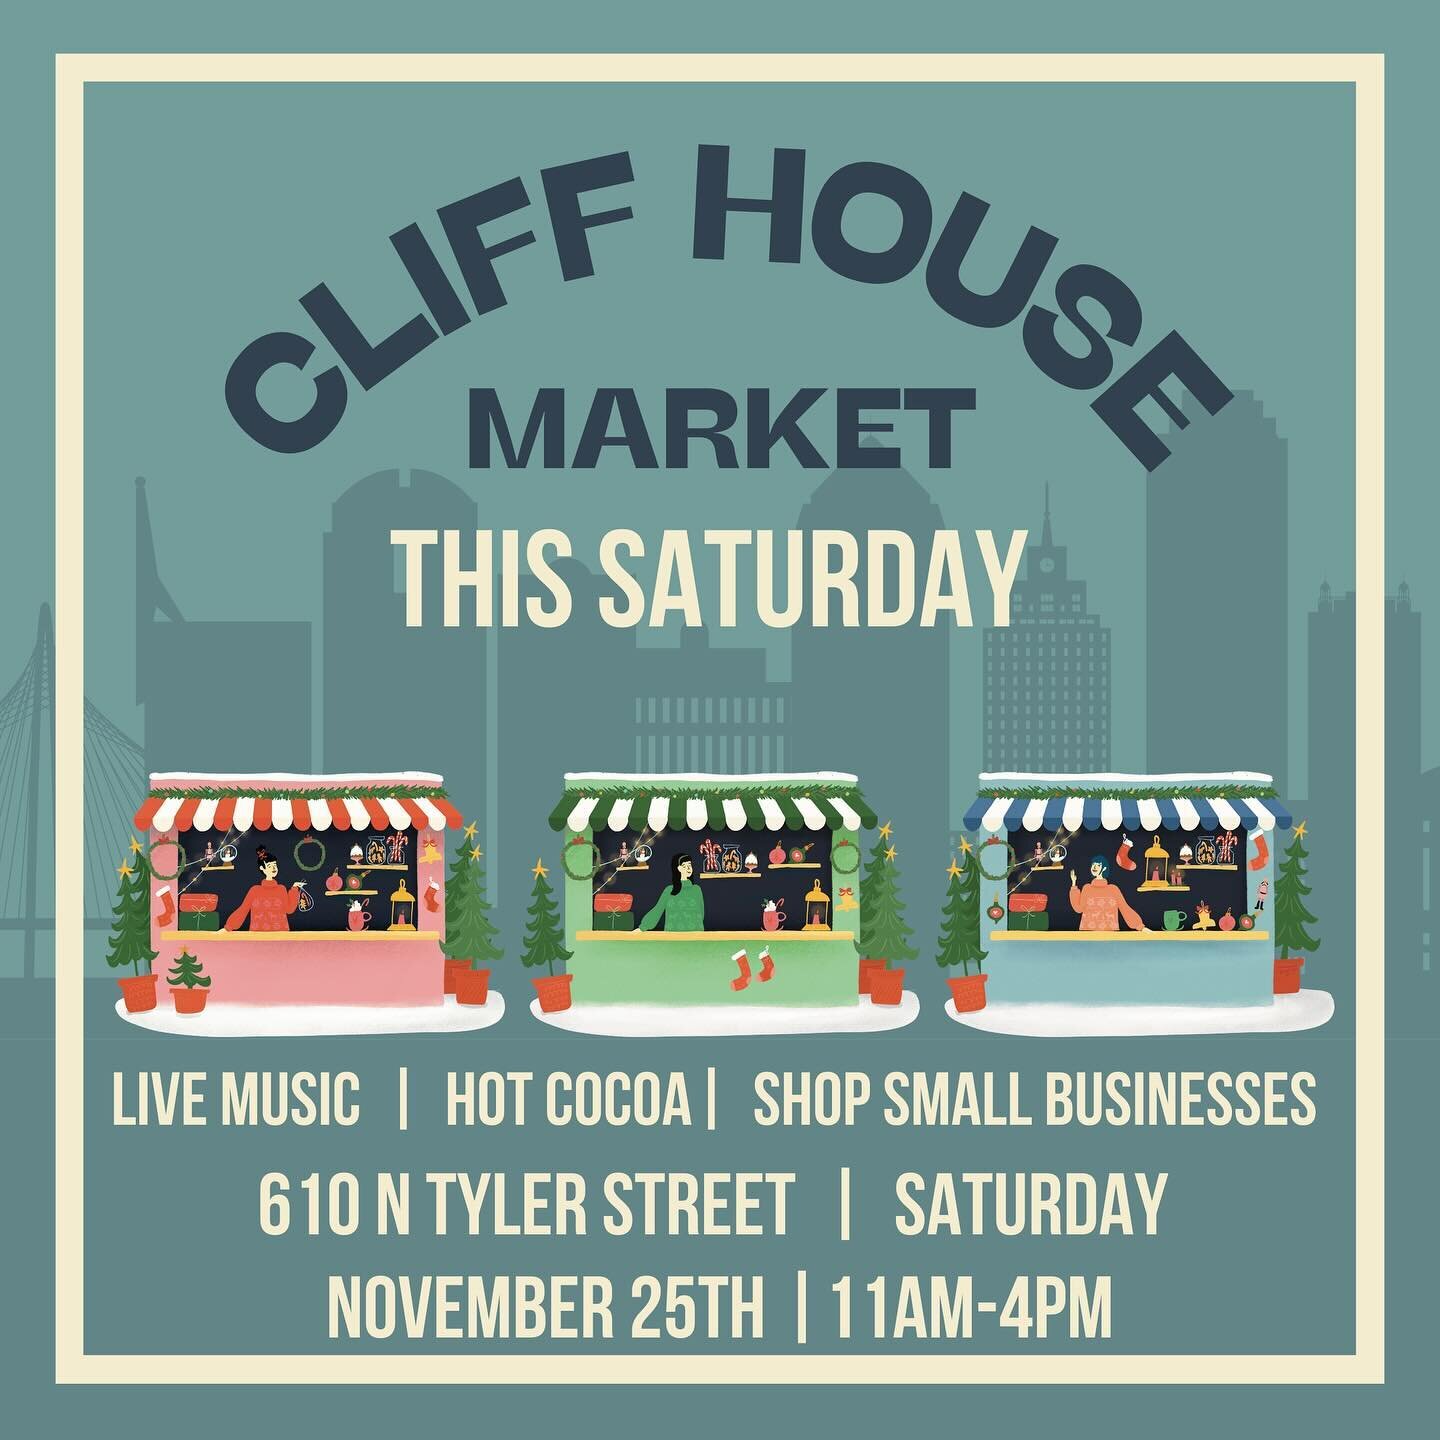 We are hosting our first ever Cliff House Market this weekend on small business Saturday!
Thank you to @dlmsupply for helping us make this event happen and to all our awesome vendors who will be here sharing their creations with us. 
Come get your Ch